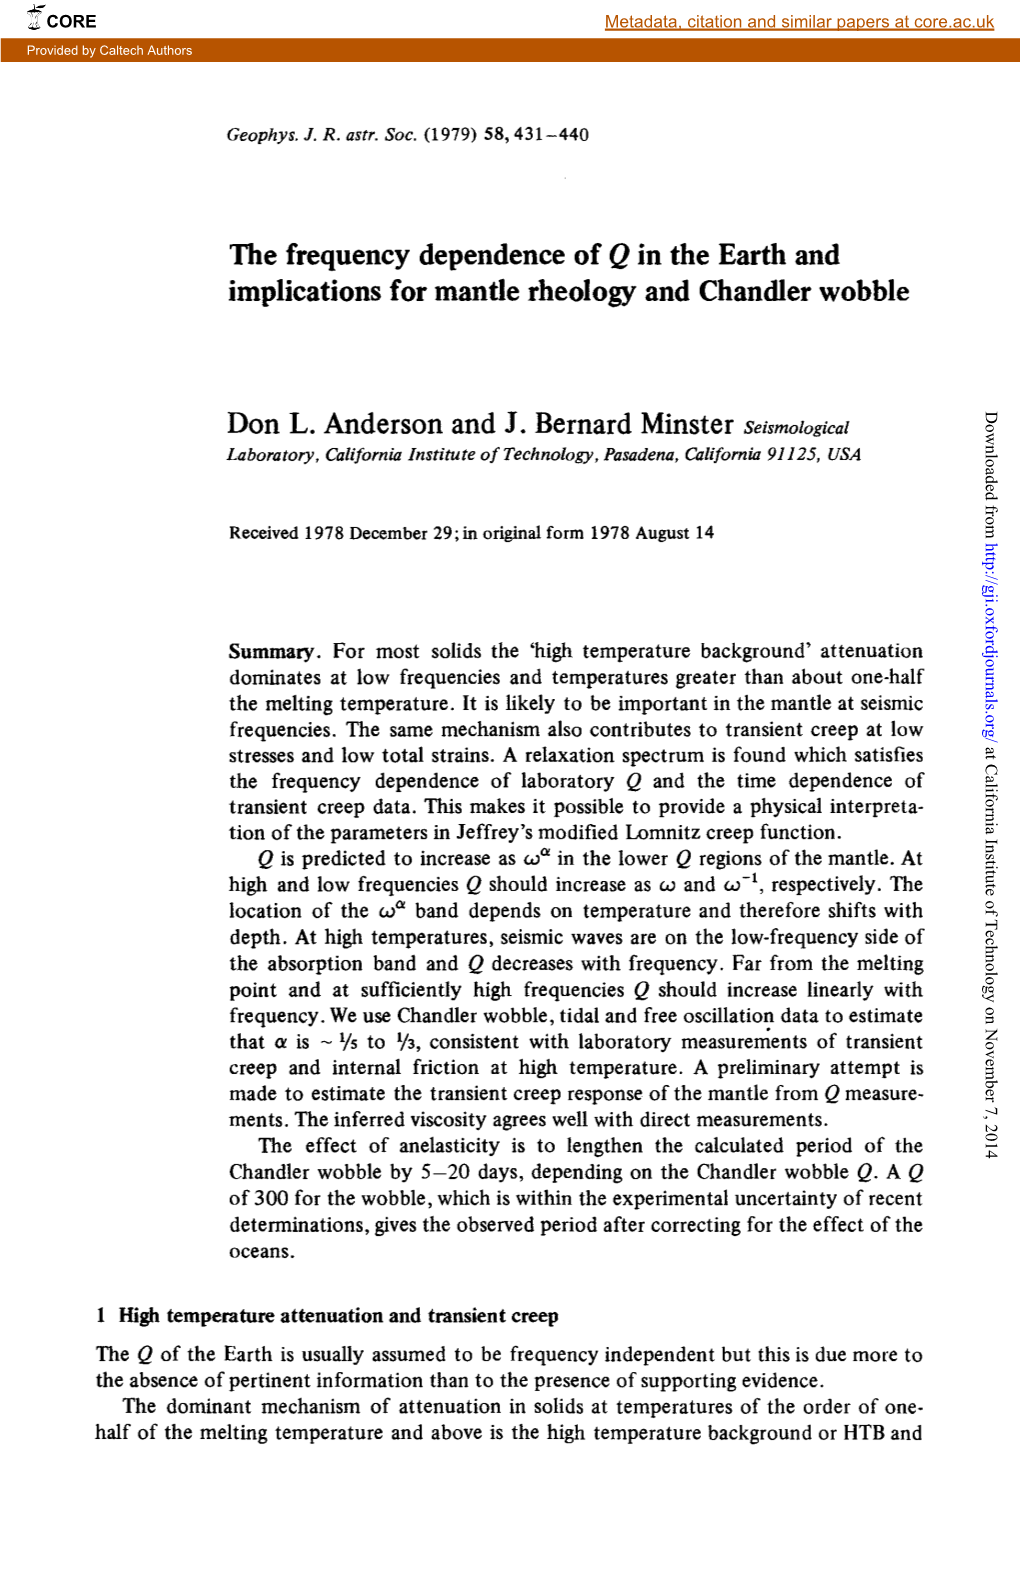 The Frequency Dependence of Q in the Earth and Implications for Mantle Rheology and Chandler Wobble Downloaded from Don L